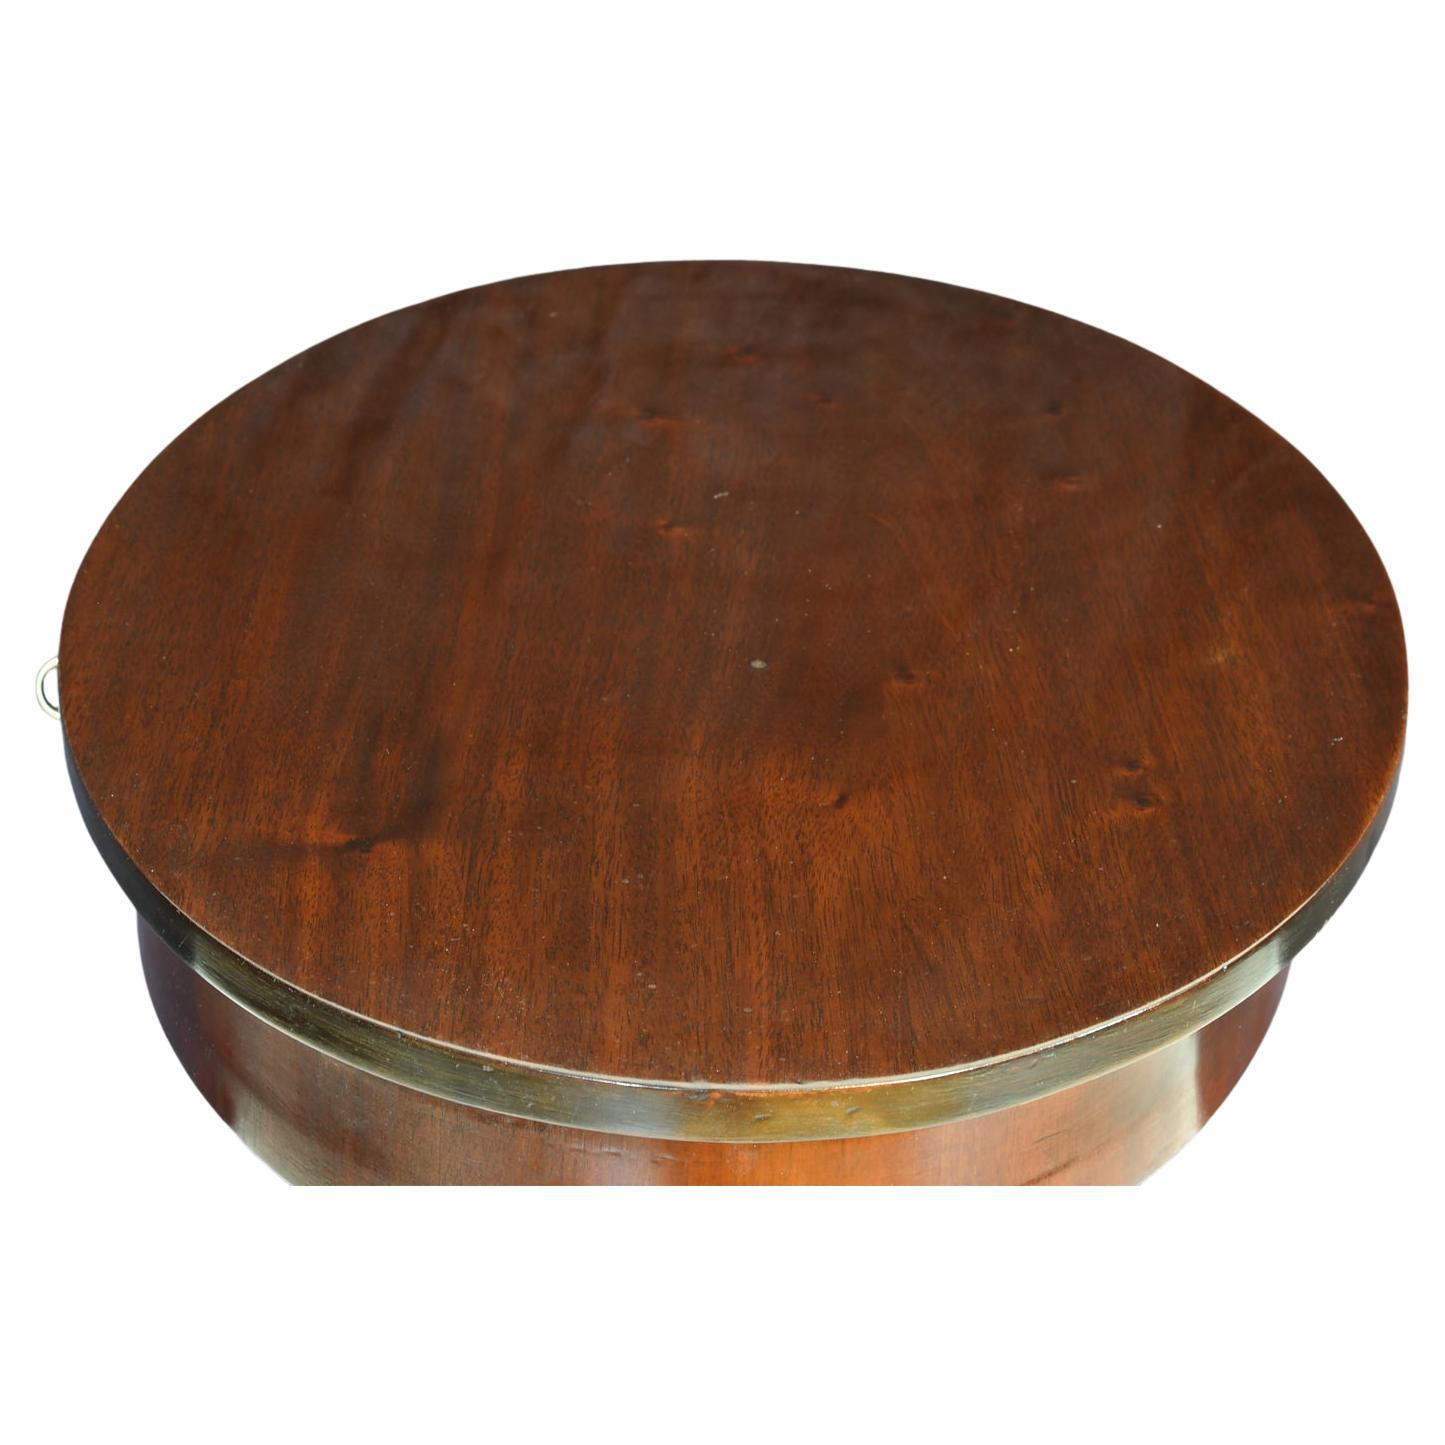 Small Antique Oval Pedestal Table or Work Table in Dark-Stained Mahogany For Sale 4